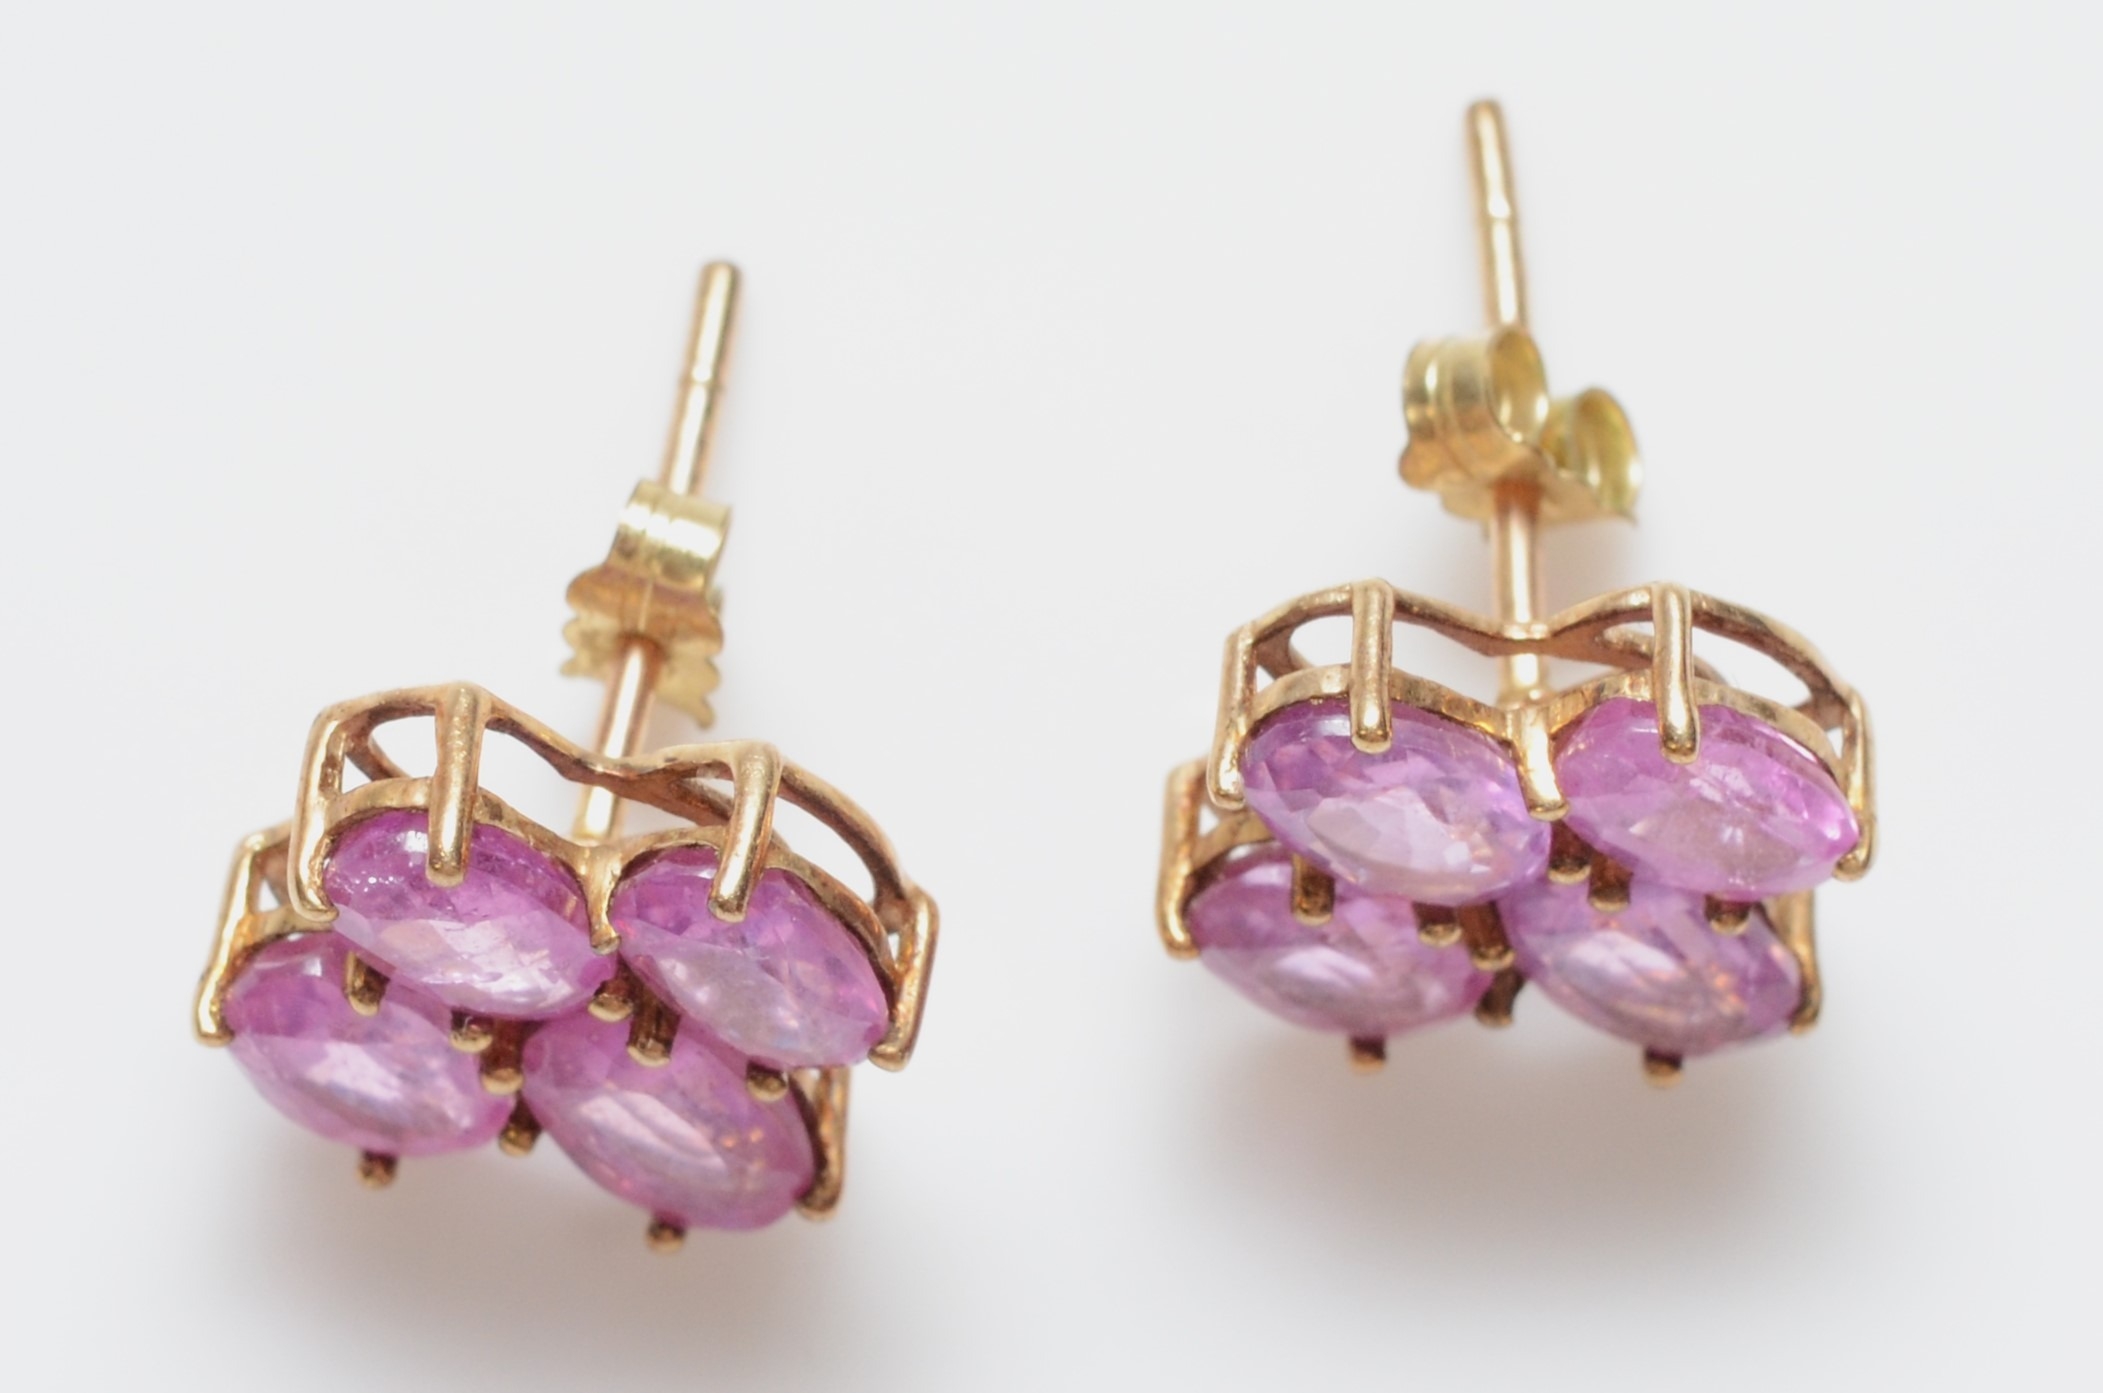 A 9ct gold pair of pink sapphire ear studs, 12 x 11mm, 2.2gm - Image 2 of 2